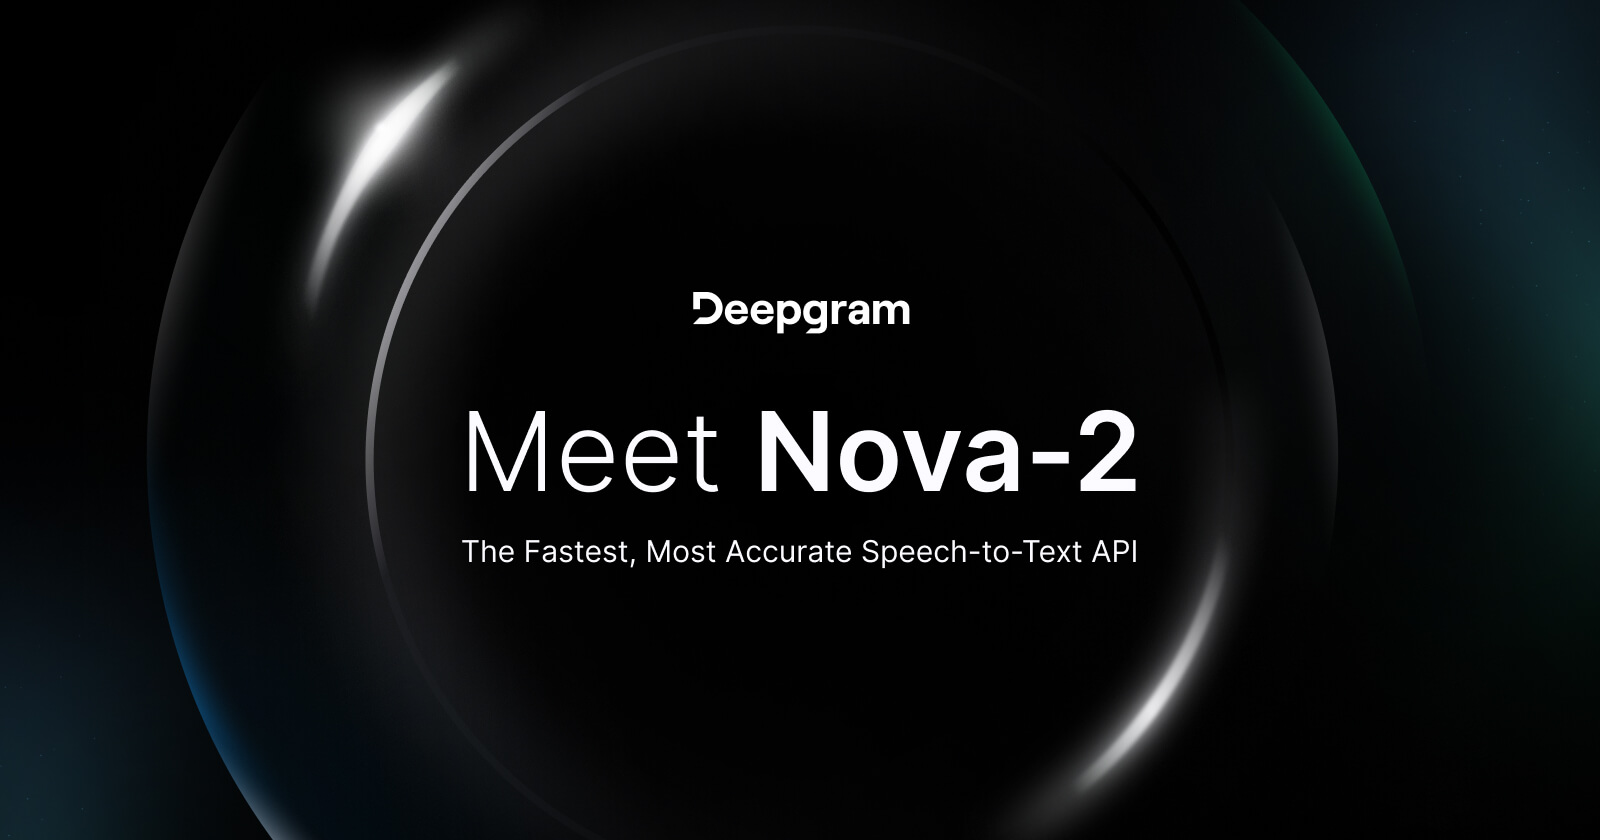 Our next-gen speech-to-text model, Nova-2, outperforms all alternatives in terms of accuracy, speed, and cost (starting at $0.0043/min ), and we have 